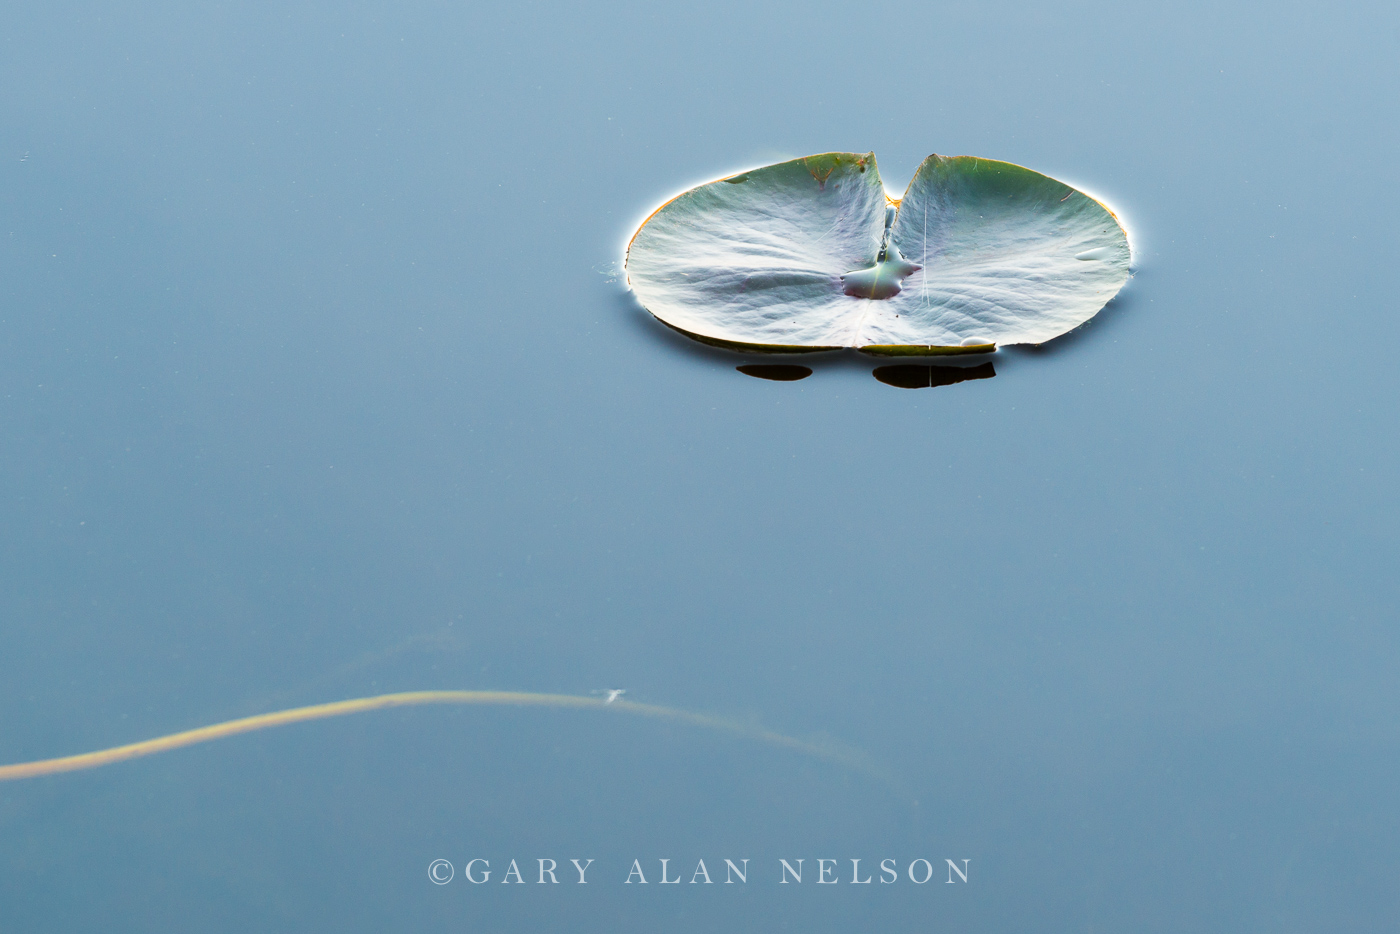 Lily pad in the calm waters of Bull Lake, Allemansratt Park, Lindstrom, Minnesota